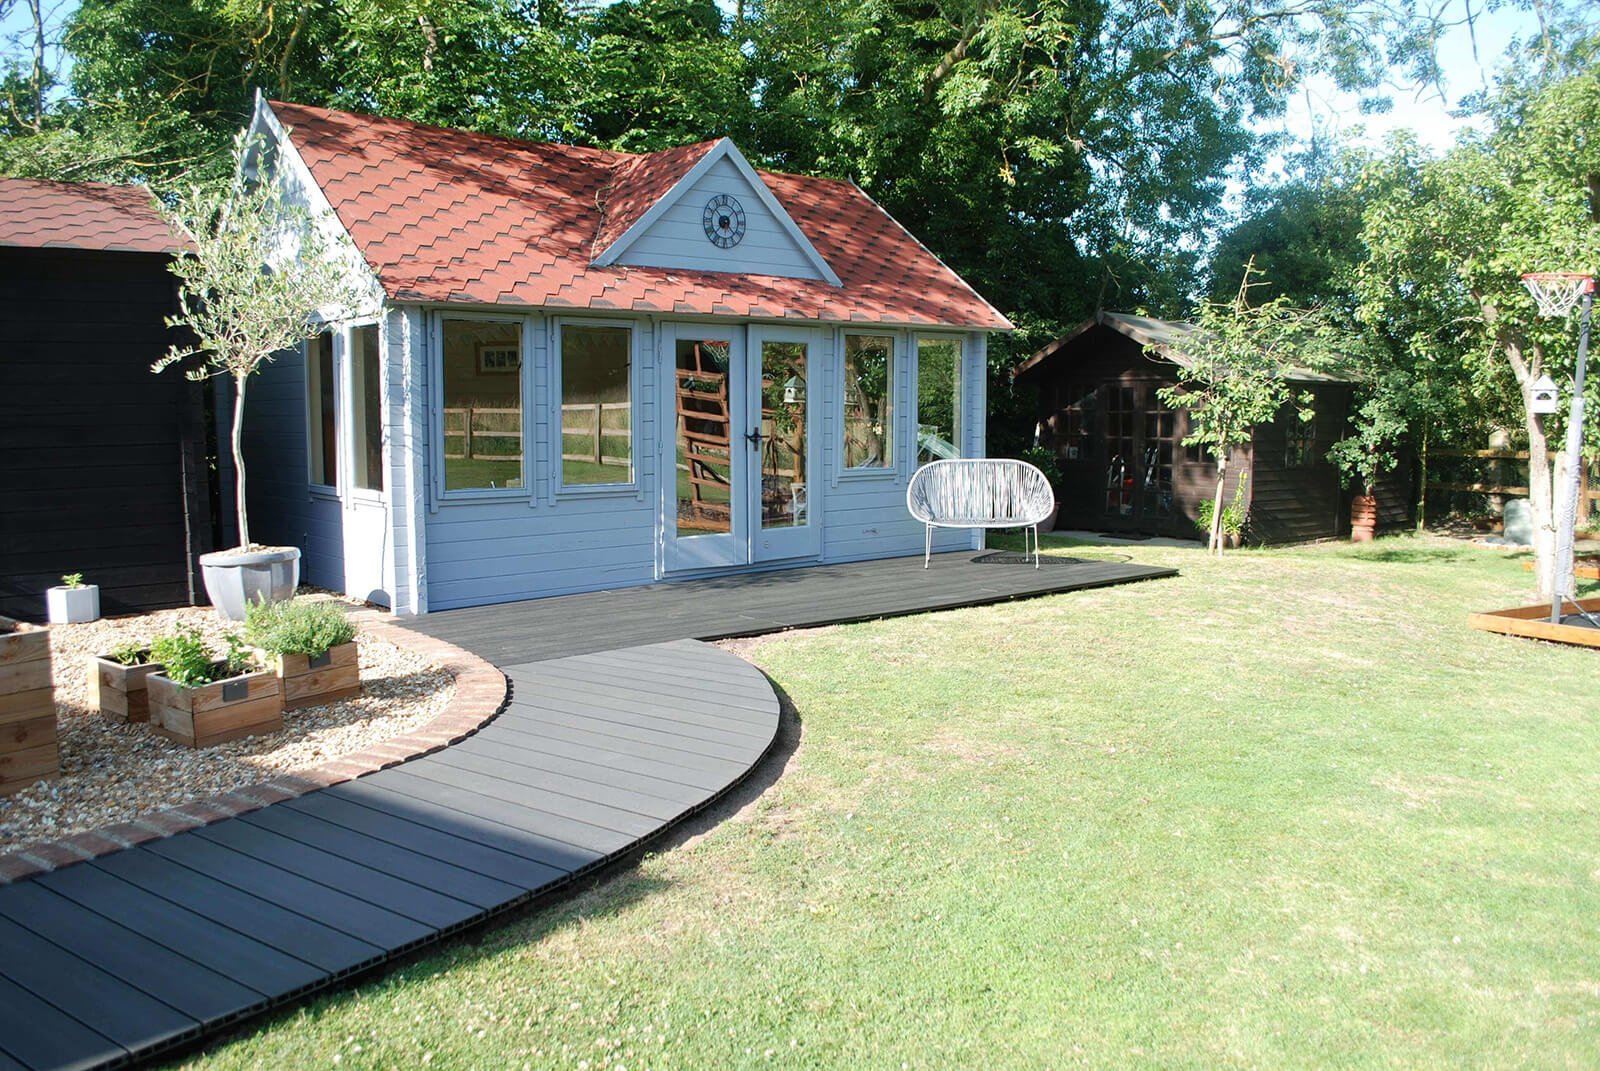 Cladco Composite Decking in Charcoal wraps around a beautiful home